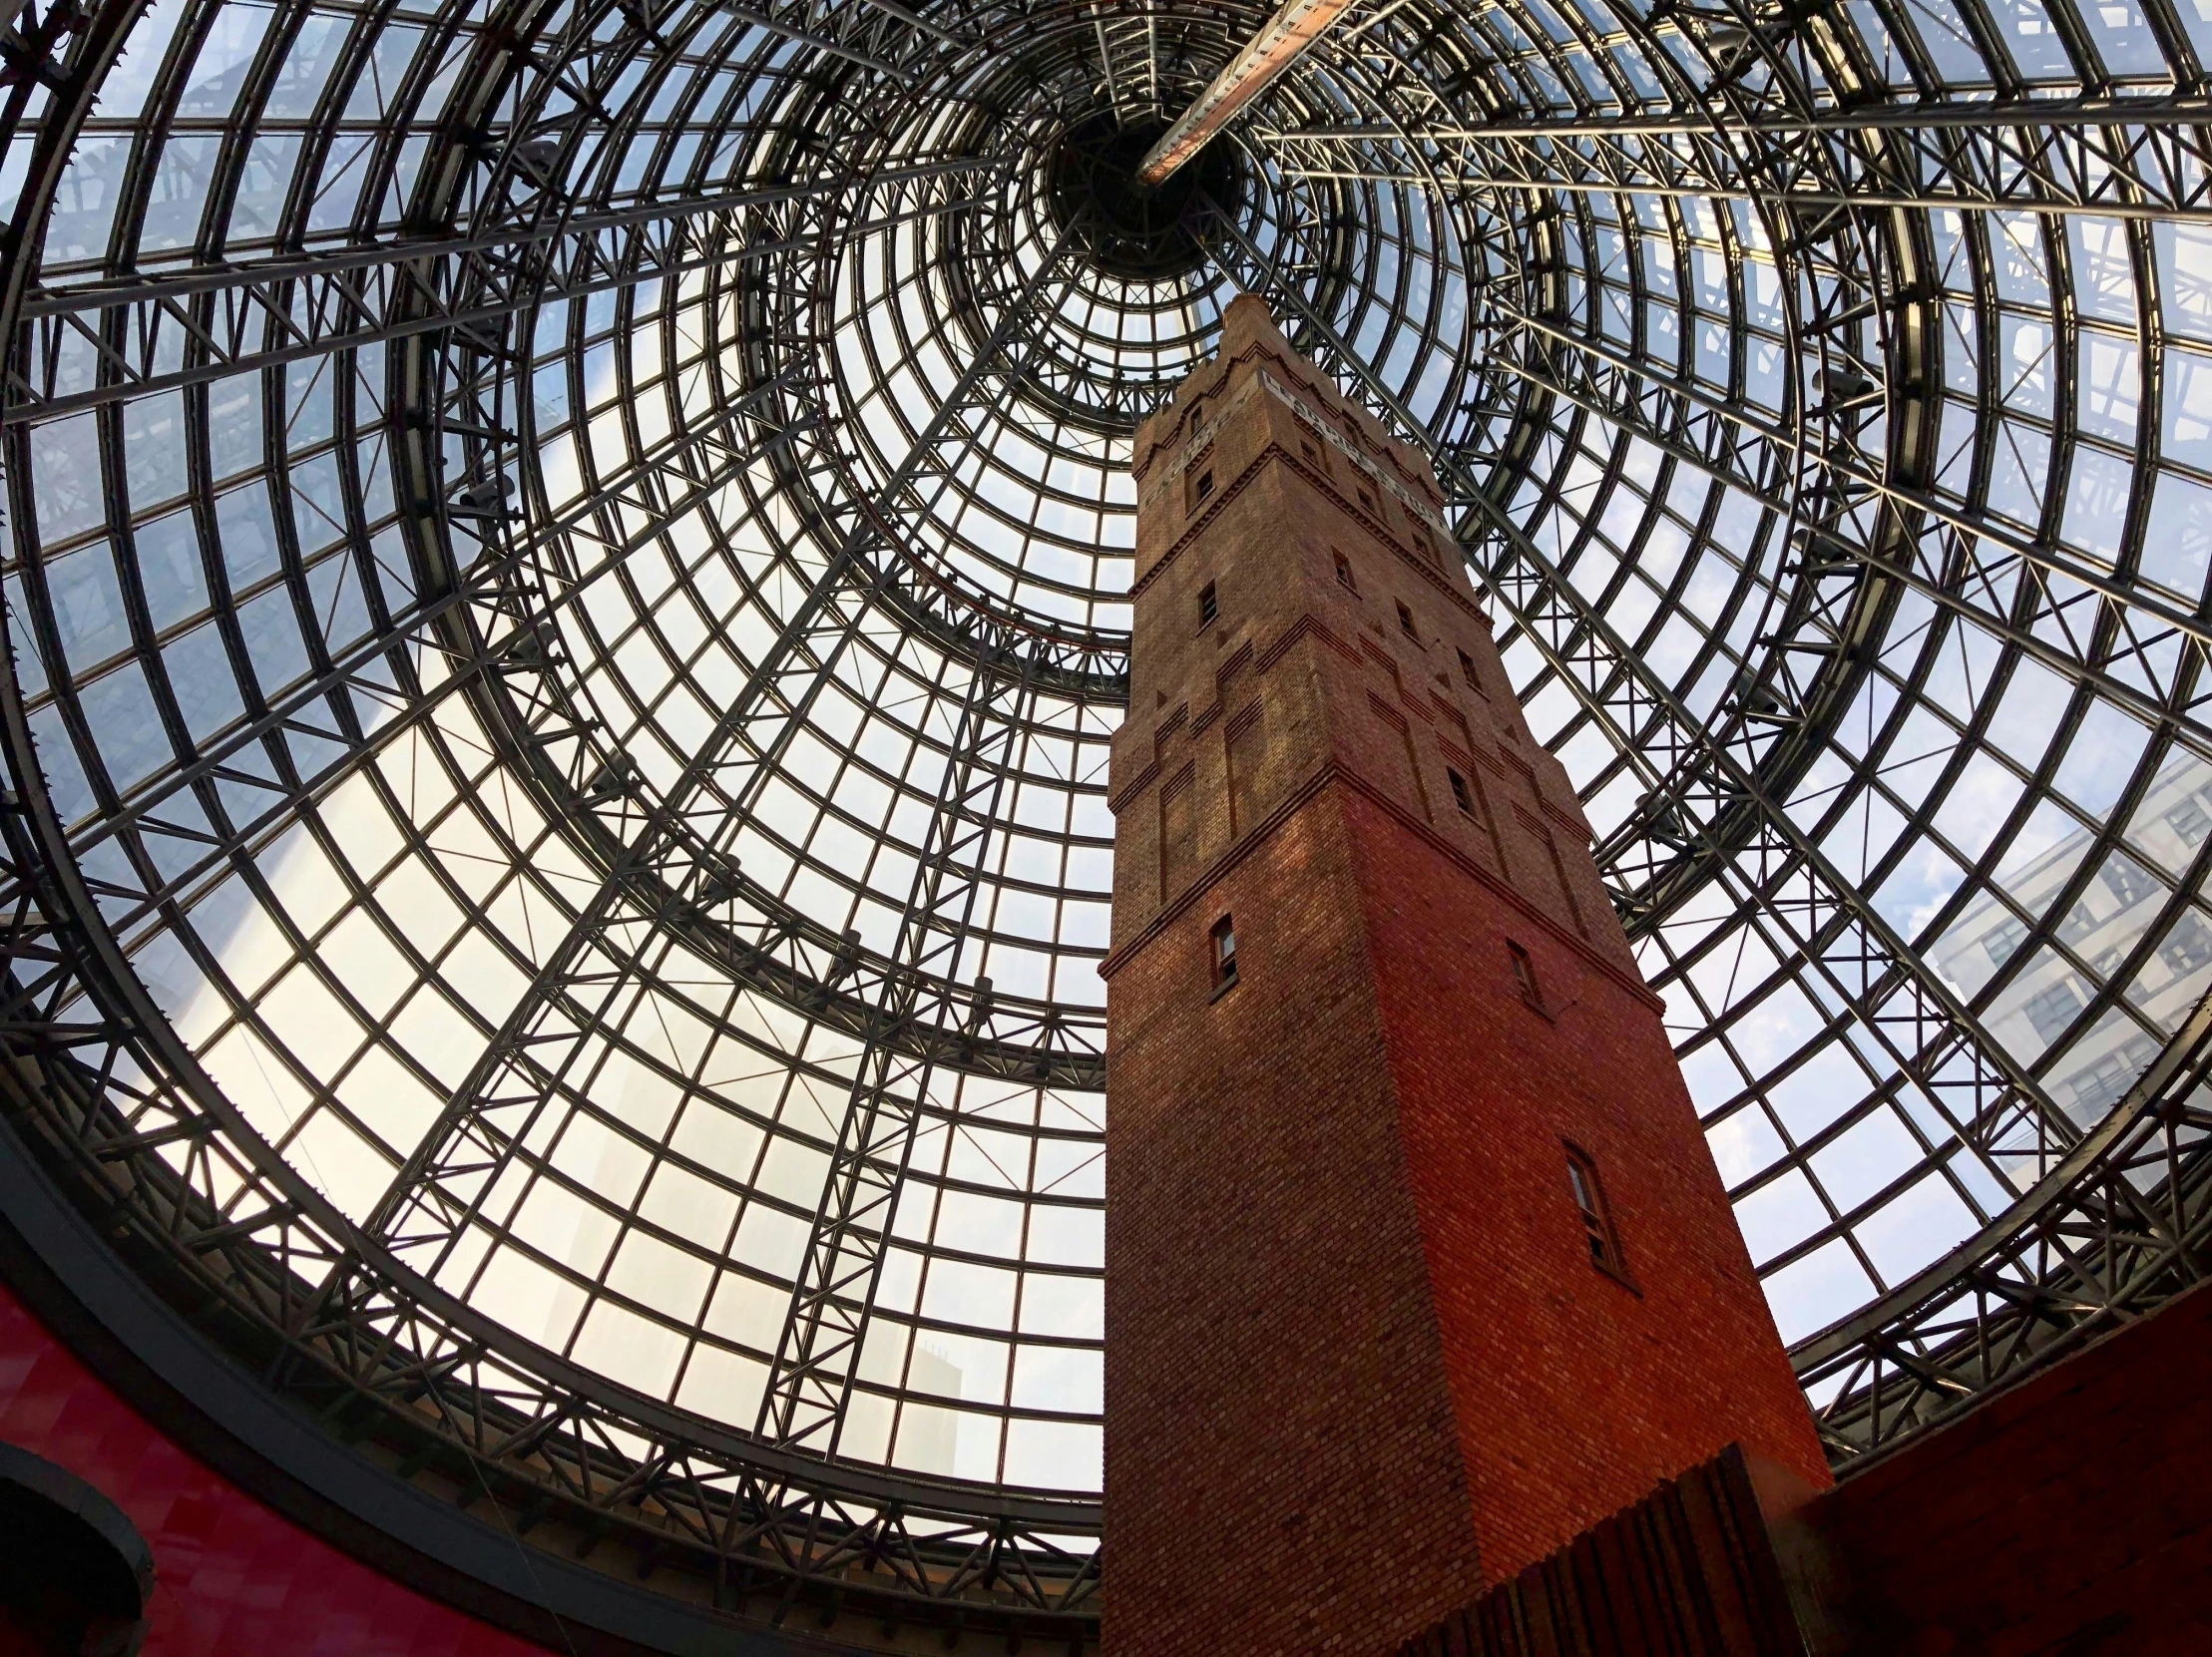 a tall clock tower sitting inside of a building, inspired by Sydney Prior Hall, interactive art, giant glass dome in space, in a massive cavernous iron city, skylights, melbourne